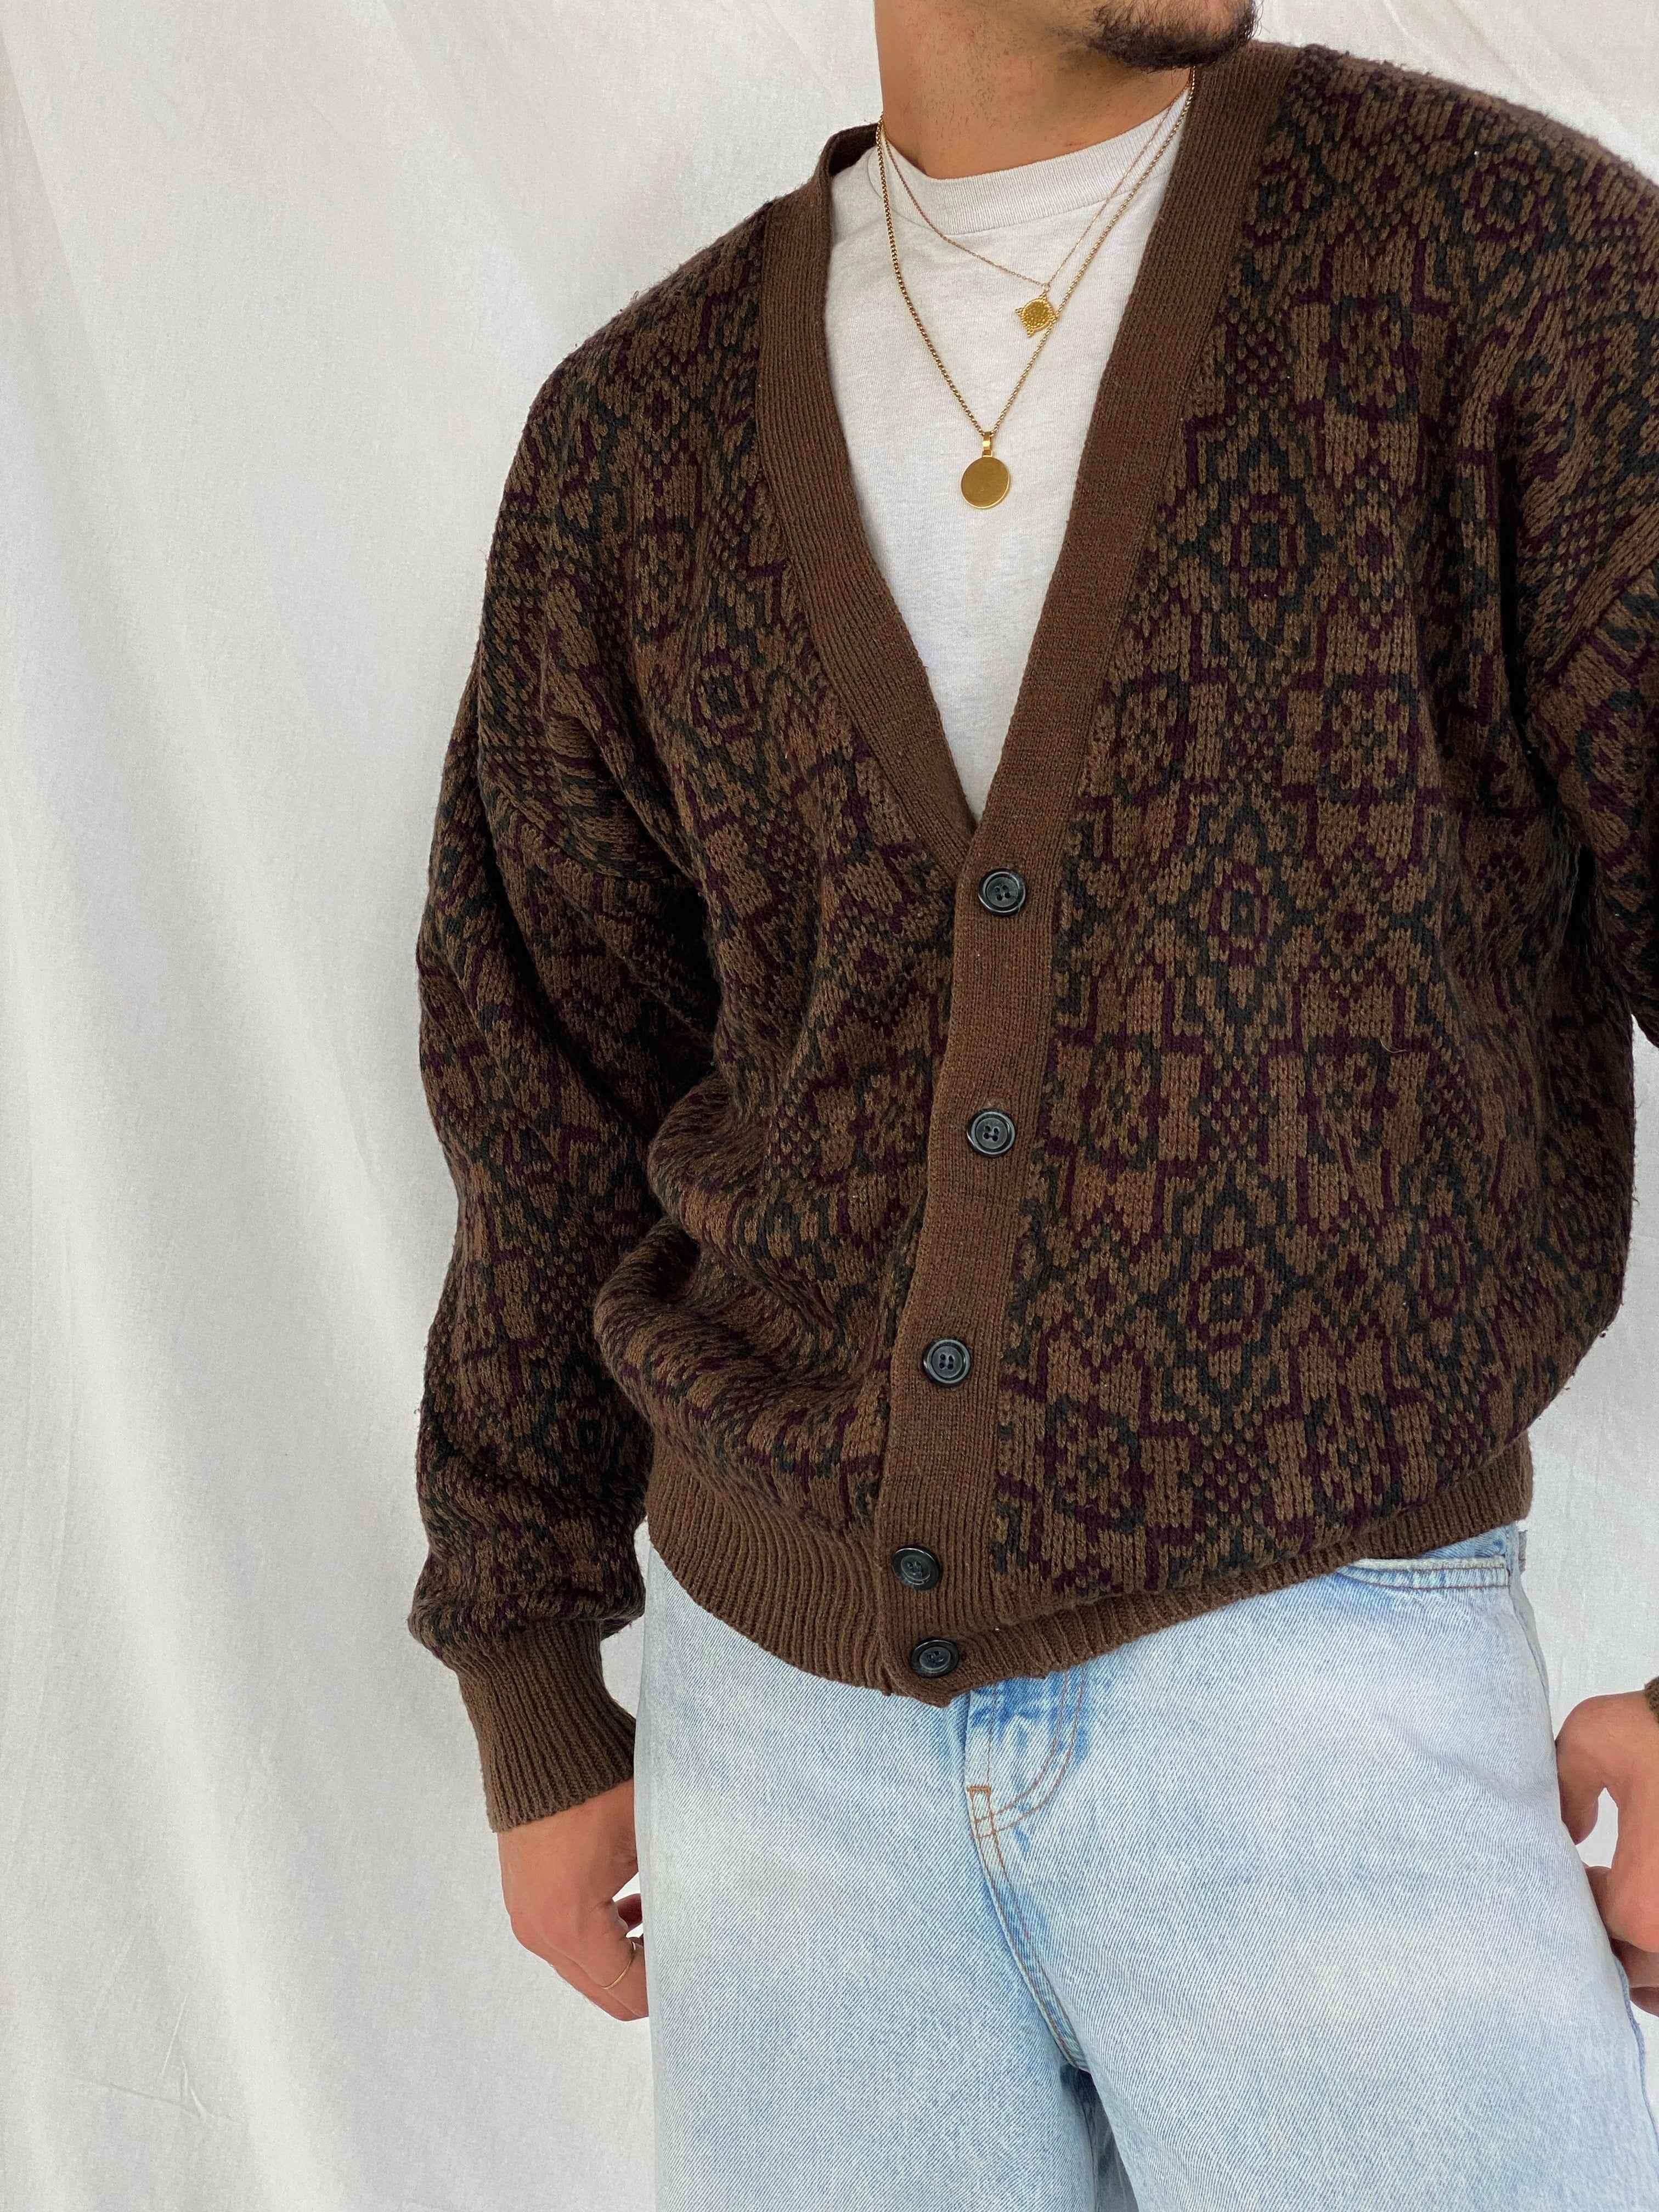 Vintage 90s Blair Knitted Cardigan Sweater- Size Large- Brown